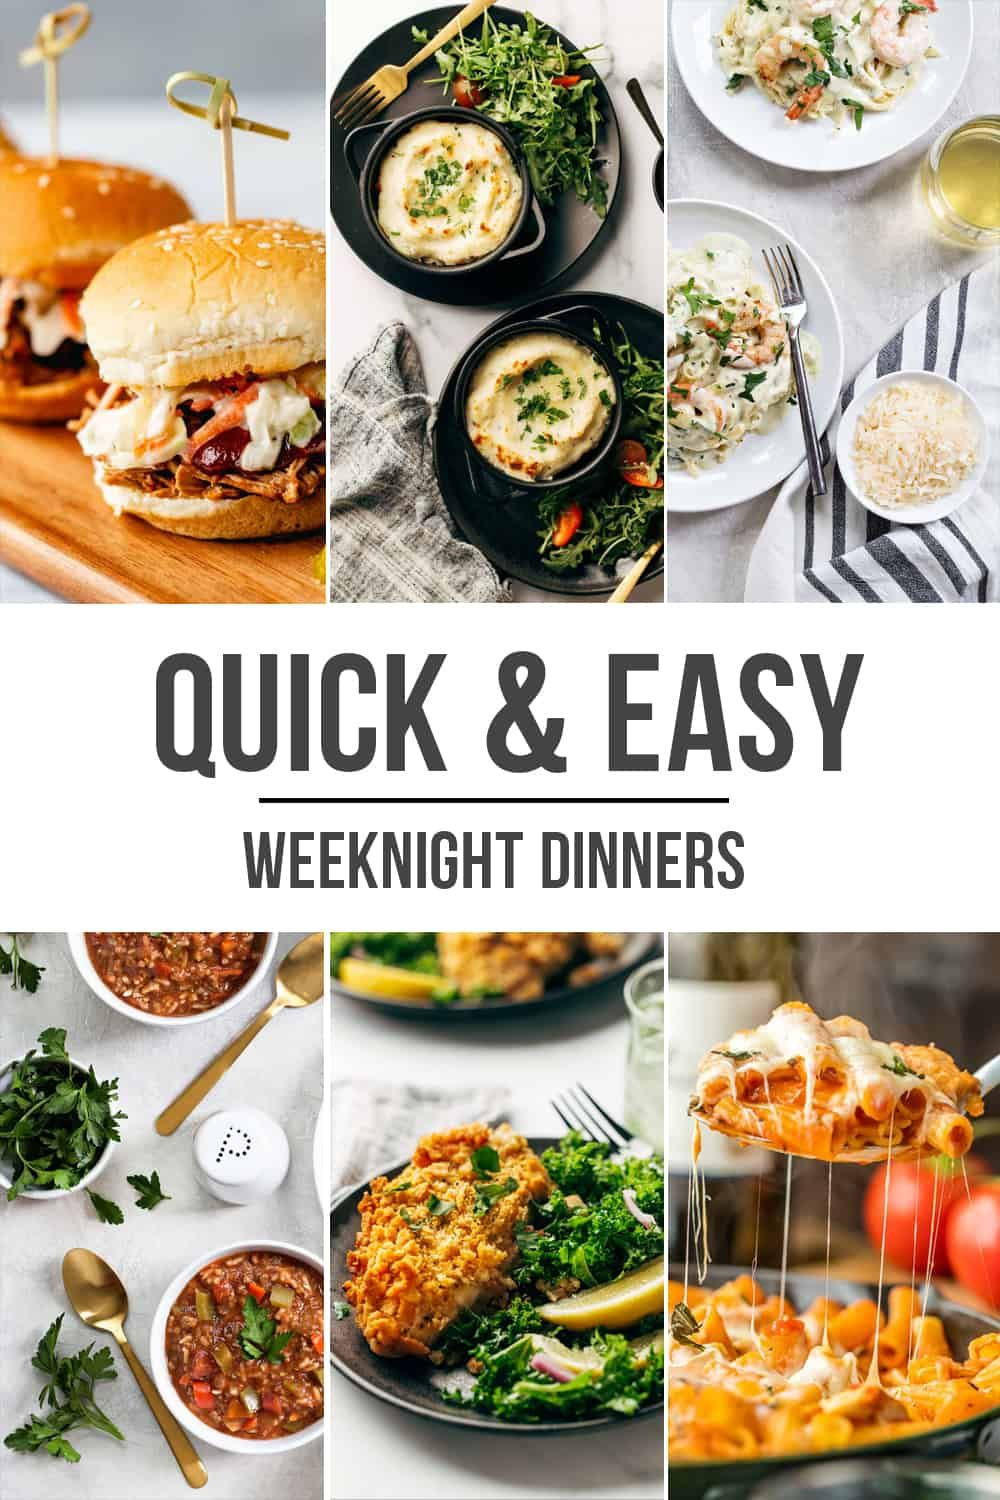 Easy Dinner Recipes For Two Simple Weeknight Meals
 Looking to spice up your weeknight dinner routine Try